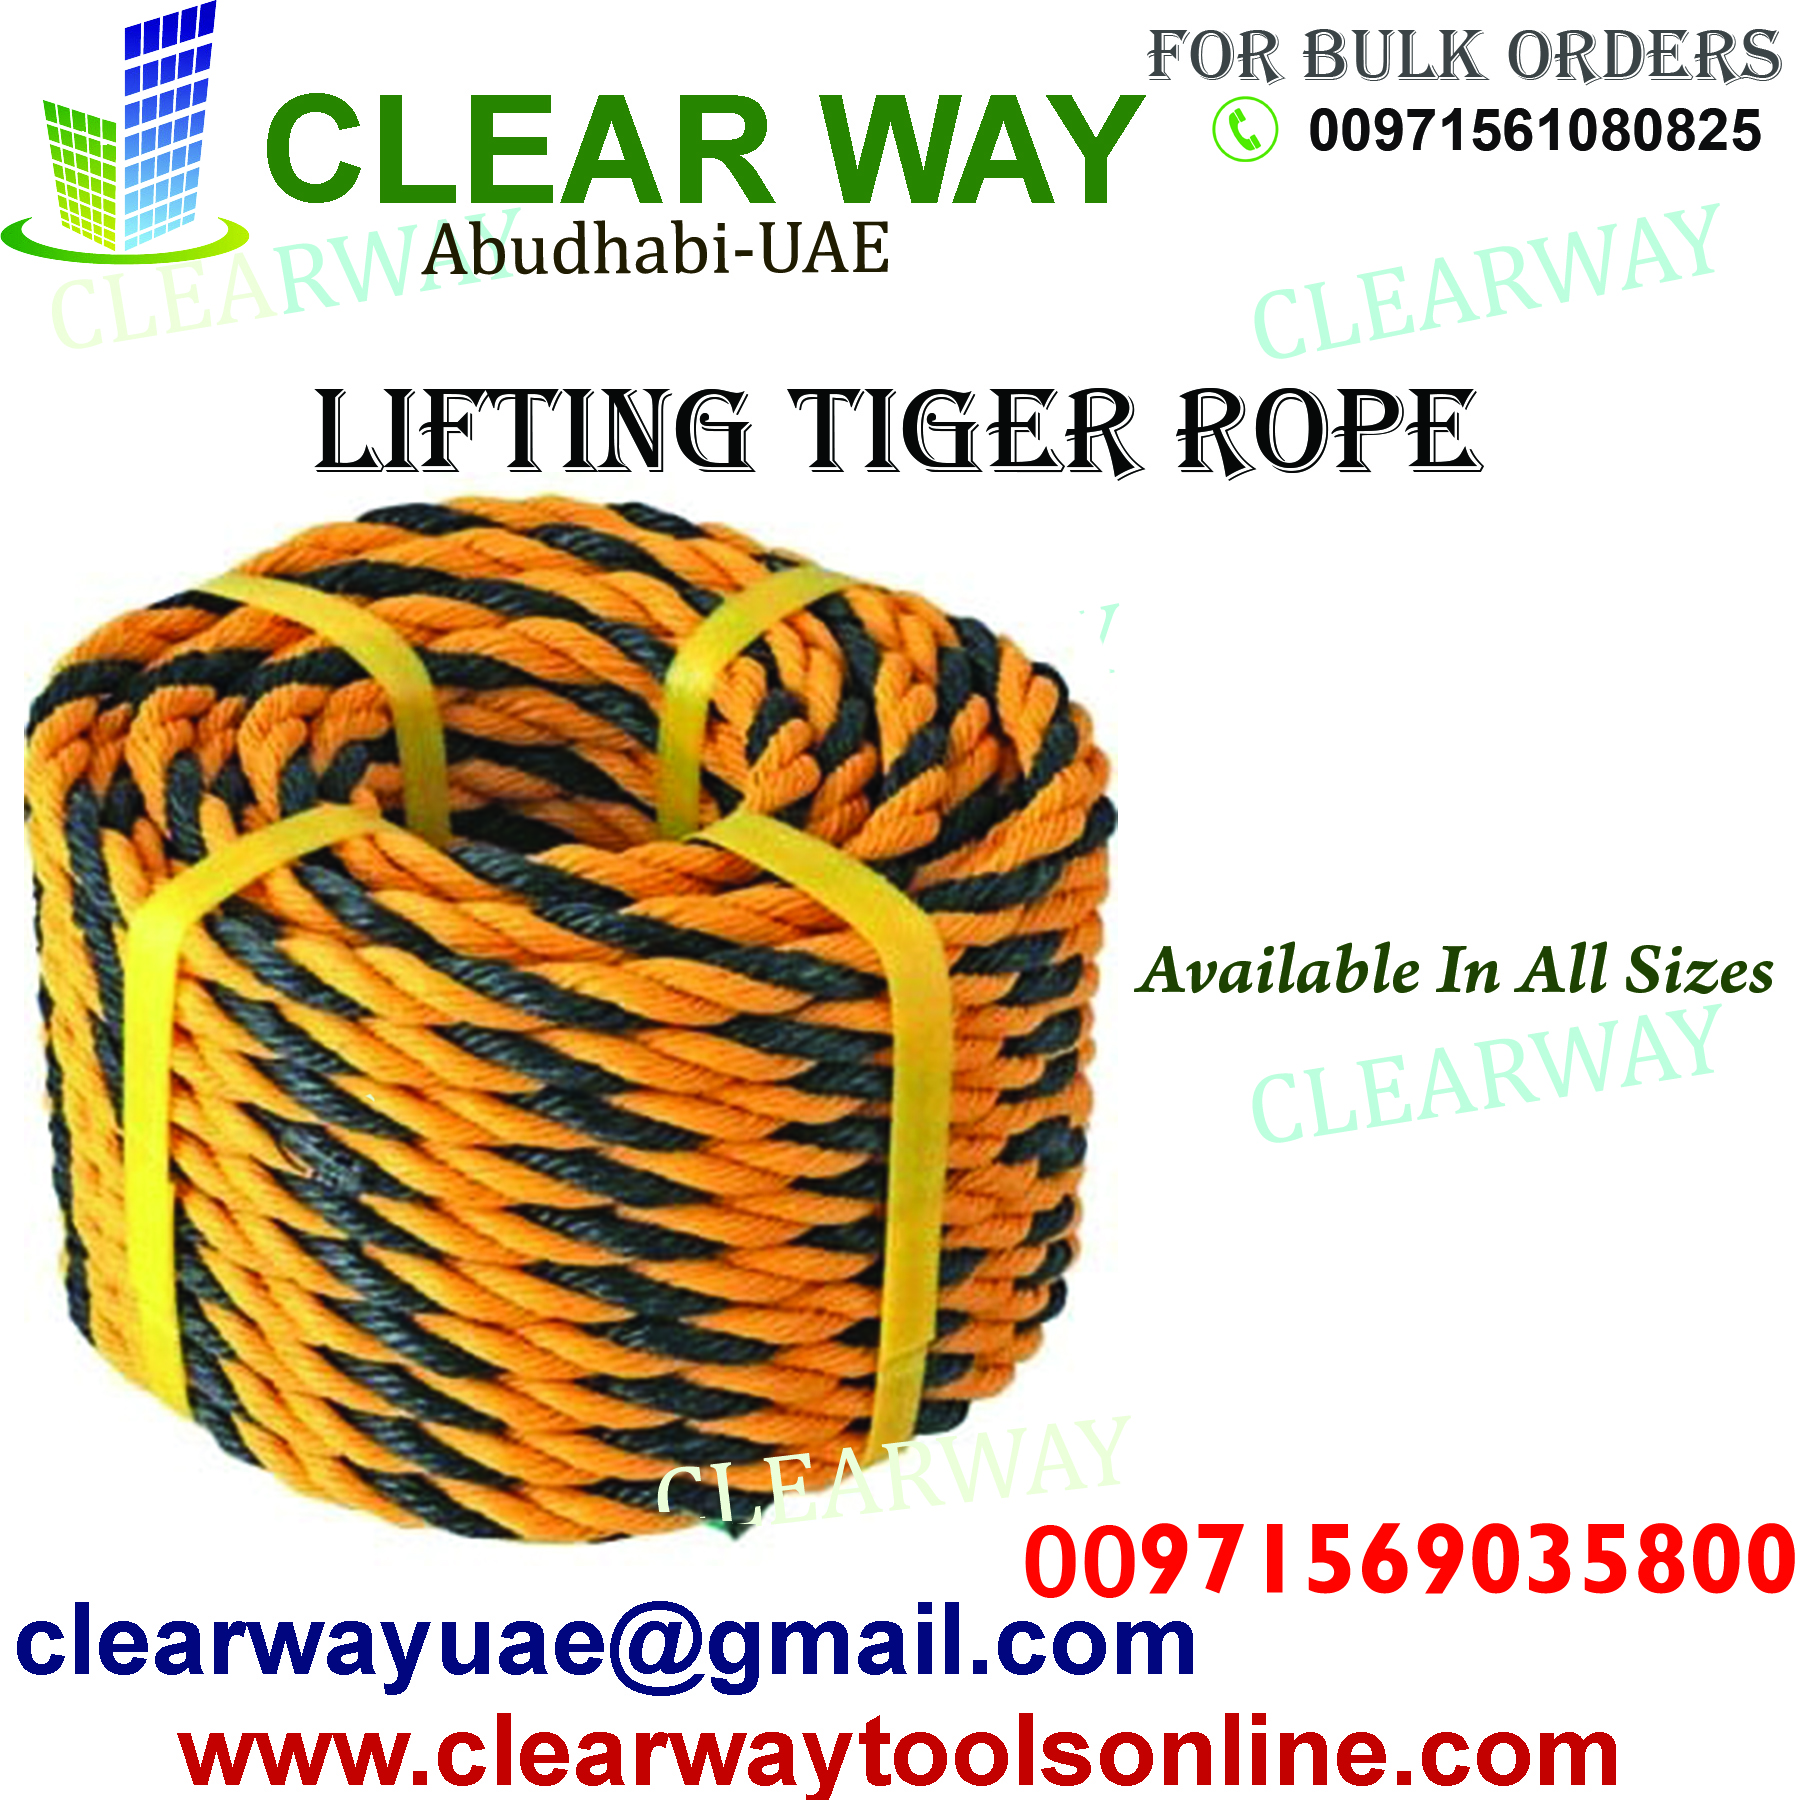 LIFTING TIGER ROPE DEALER IN MUSSAFAH , ABUDHABI , UAE BY CLEARWAY